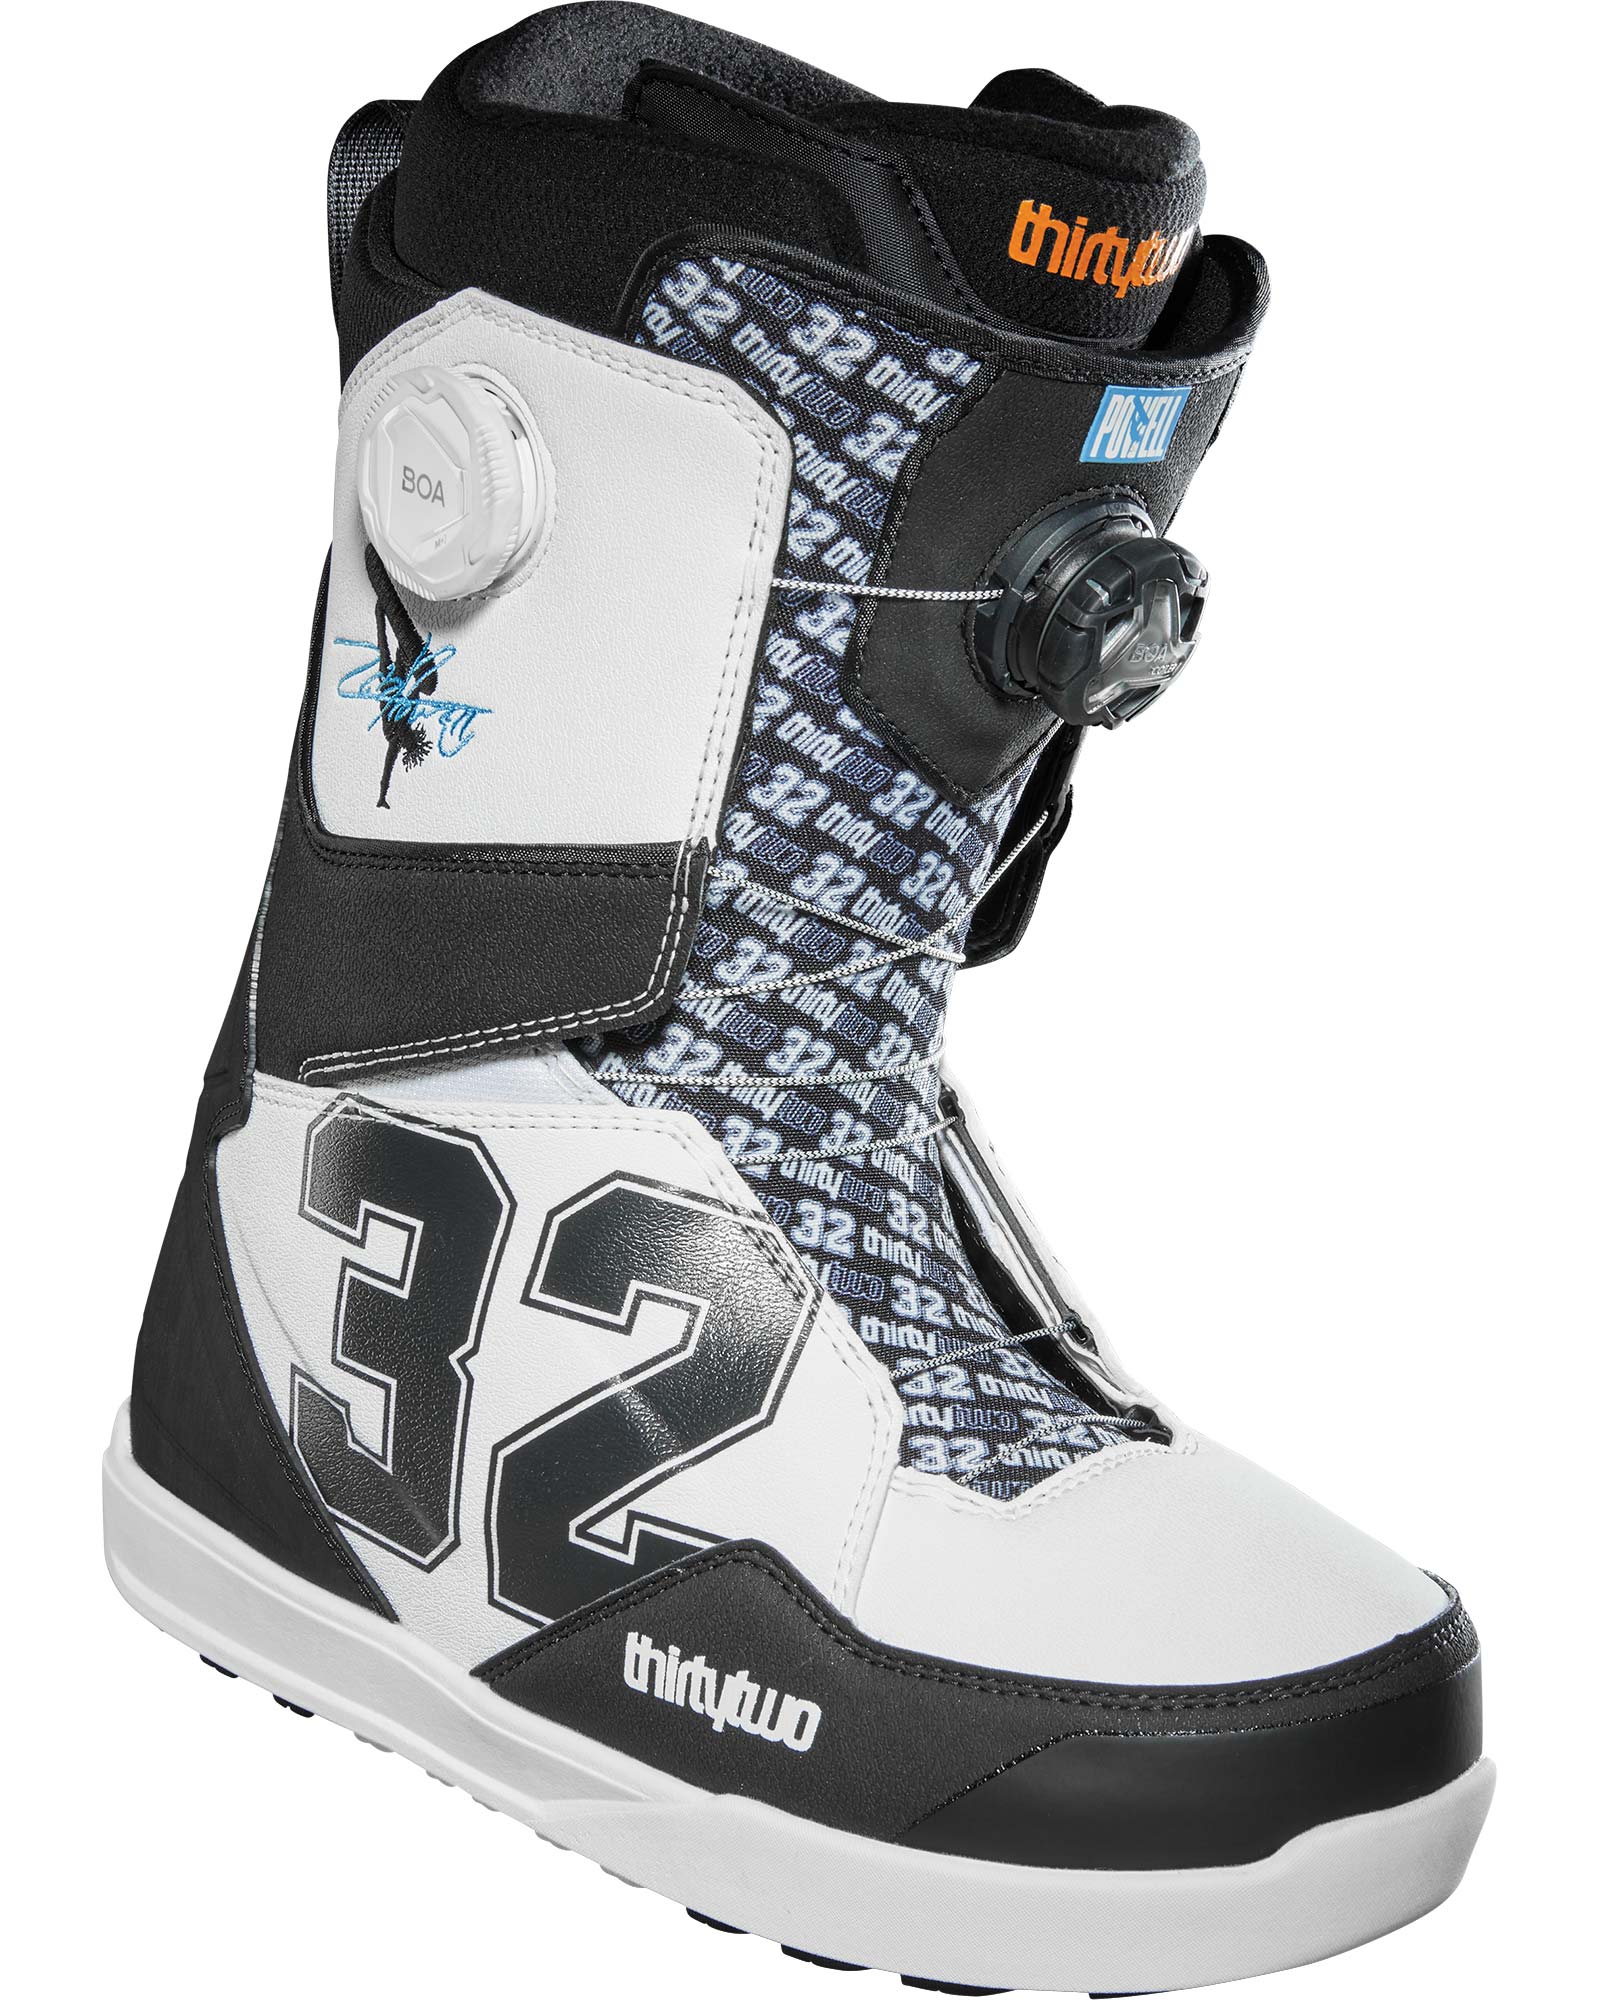 ThirtyTwo Men's Lashed Powell Double BOA Snowboard Boots 0